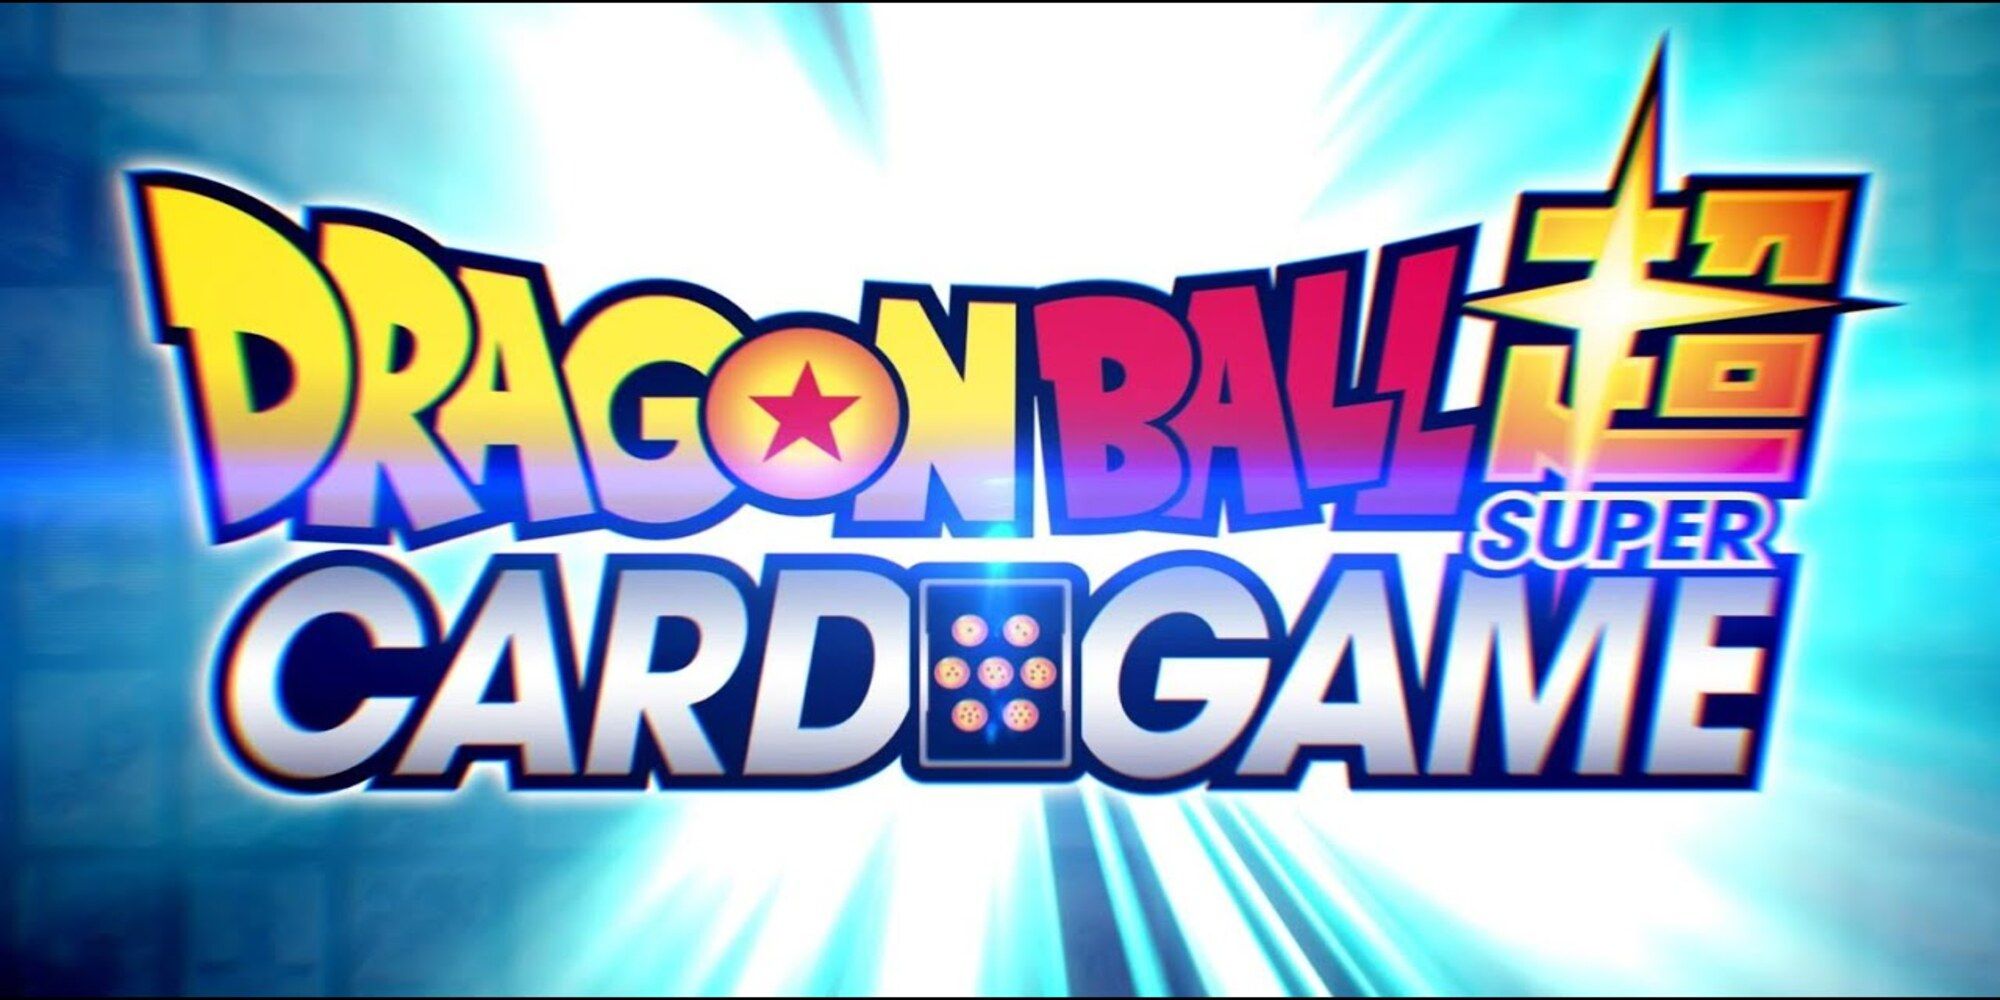 The words Dragon Ball Super Card Game appear in all caps in front of a blue background.